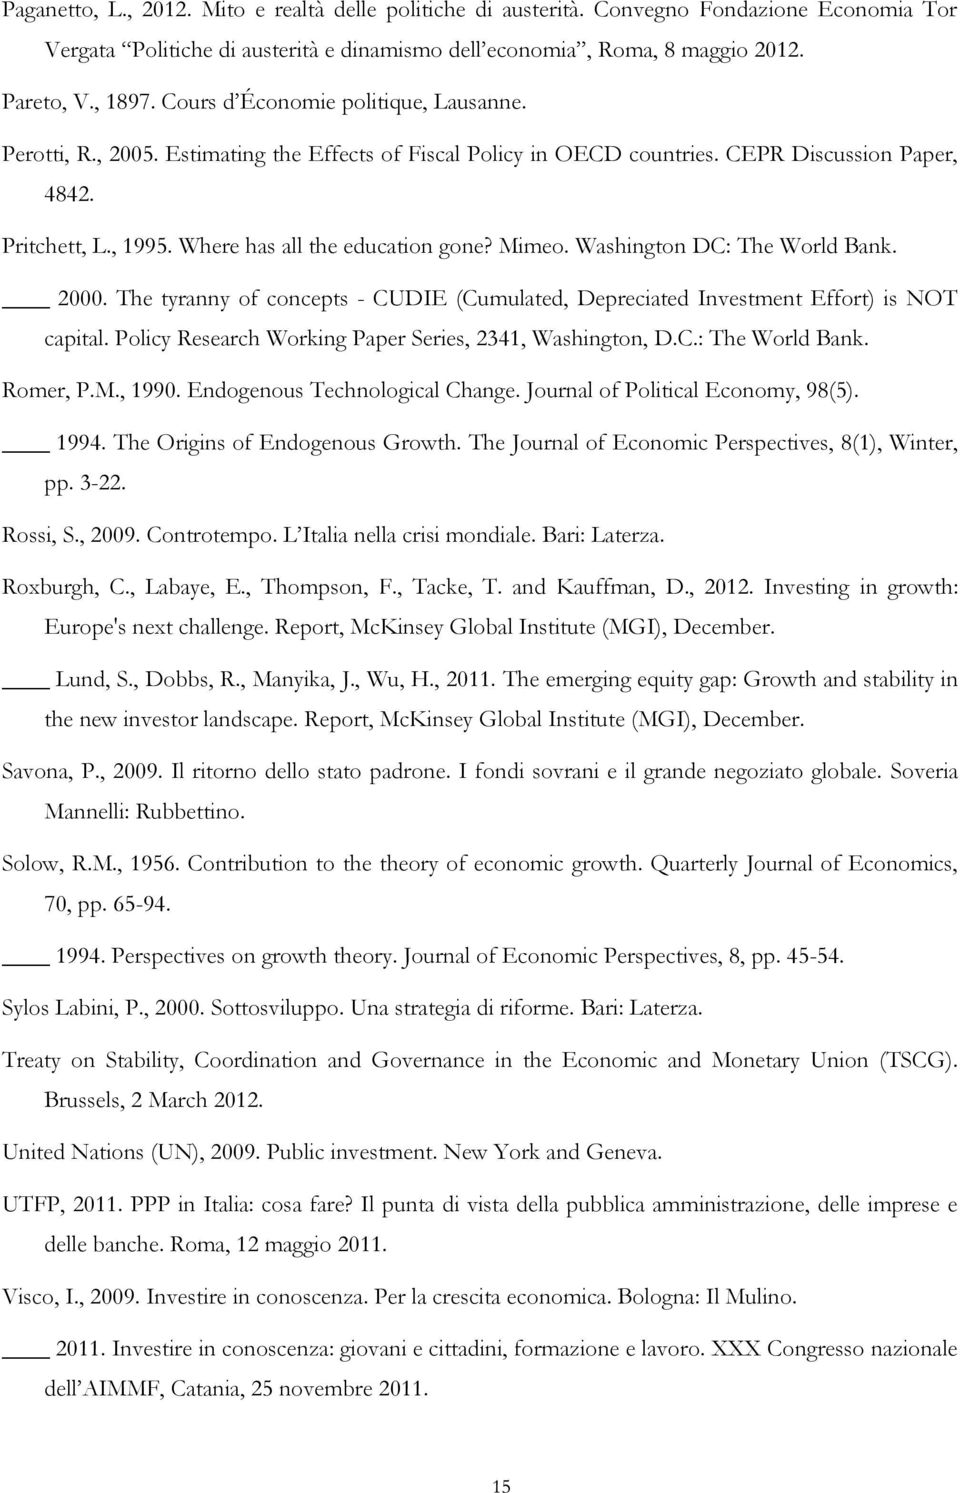 Mimeo. Washington DC: The World Bank. 2000. The tyranny of concepts - CUDIE (Cumulated, Depreciated Investment Effort) is NOT capital. Policy Research Working Paper Series, 2341, Washington, D.C.: The World Bank. Romer, P.